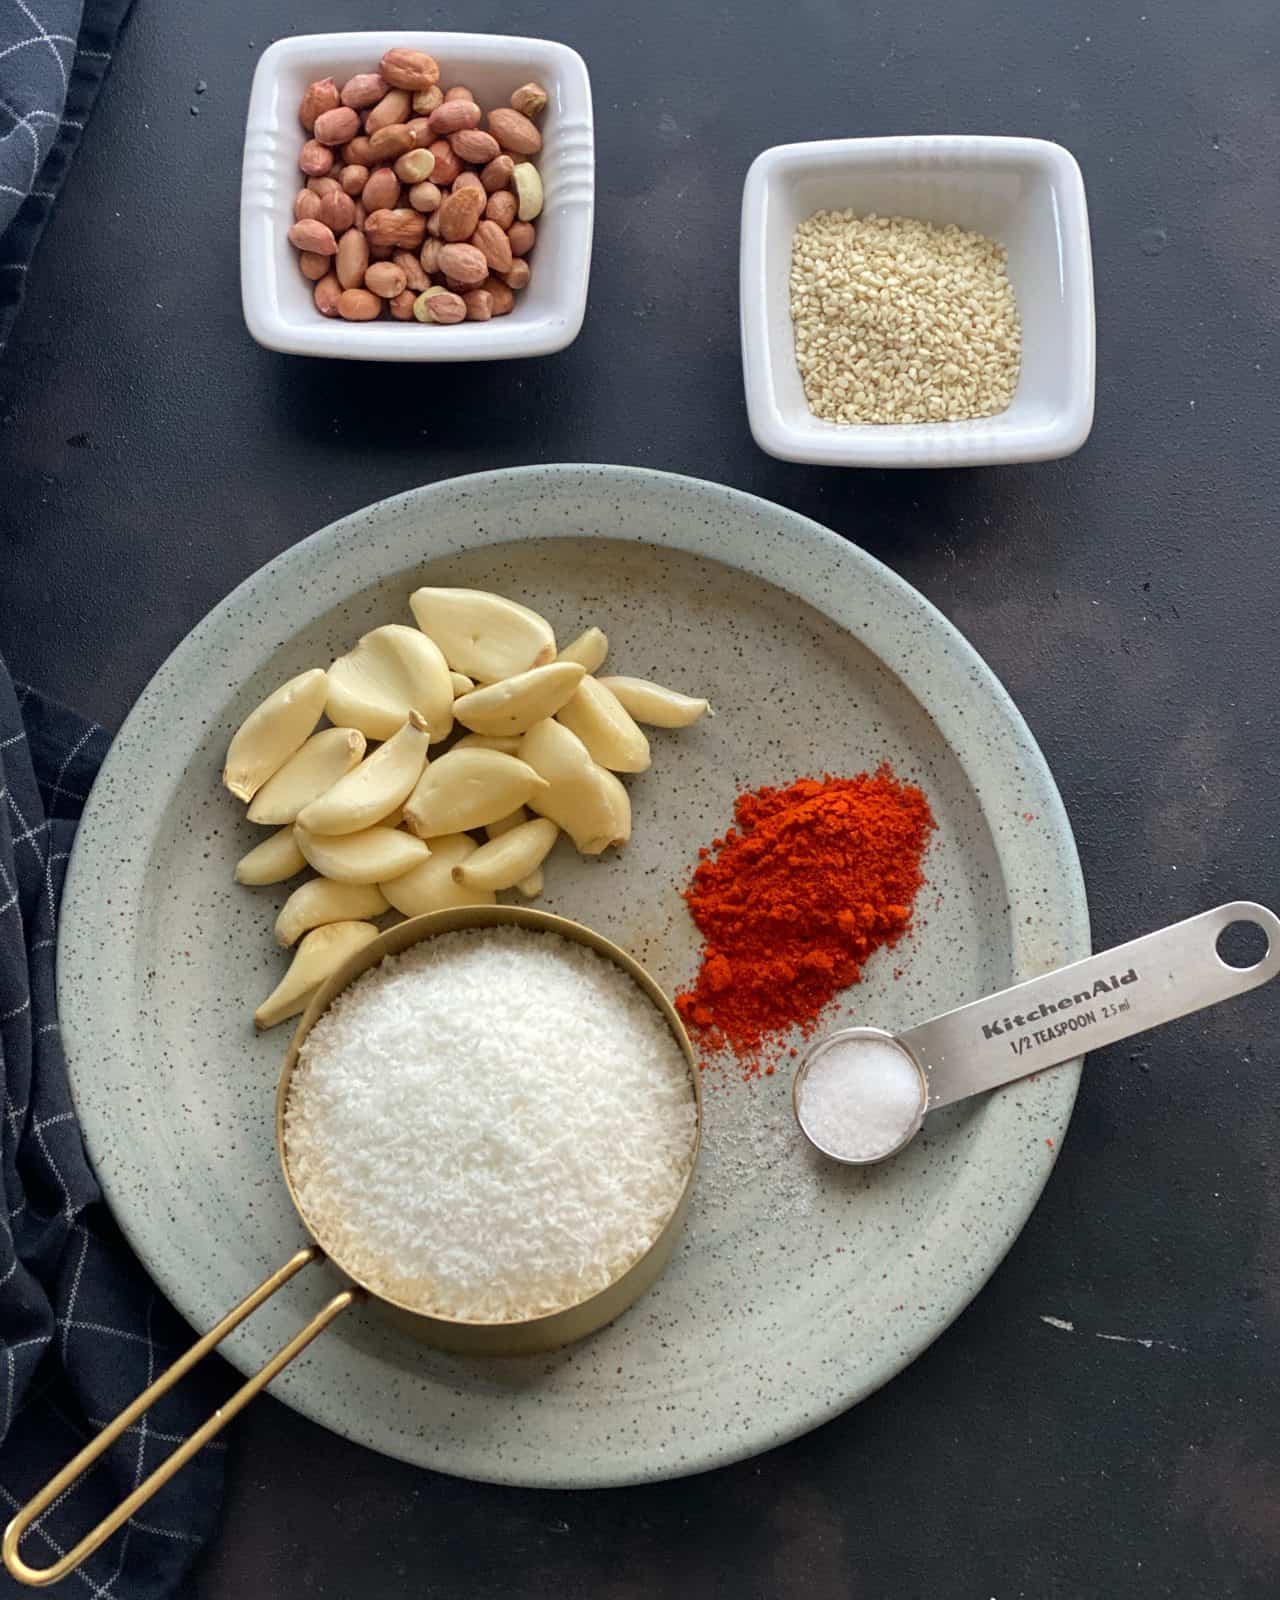 Ingredients for garlic chutney laid out in grey plate - desiccated coconut, chili powder, garlic cloves, salt. Sesame seeds and red skin peanuts are in separate bowls.